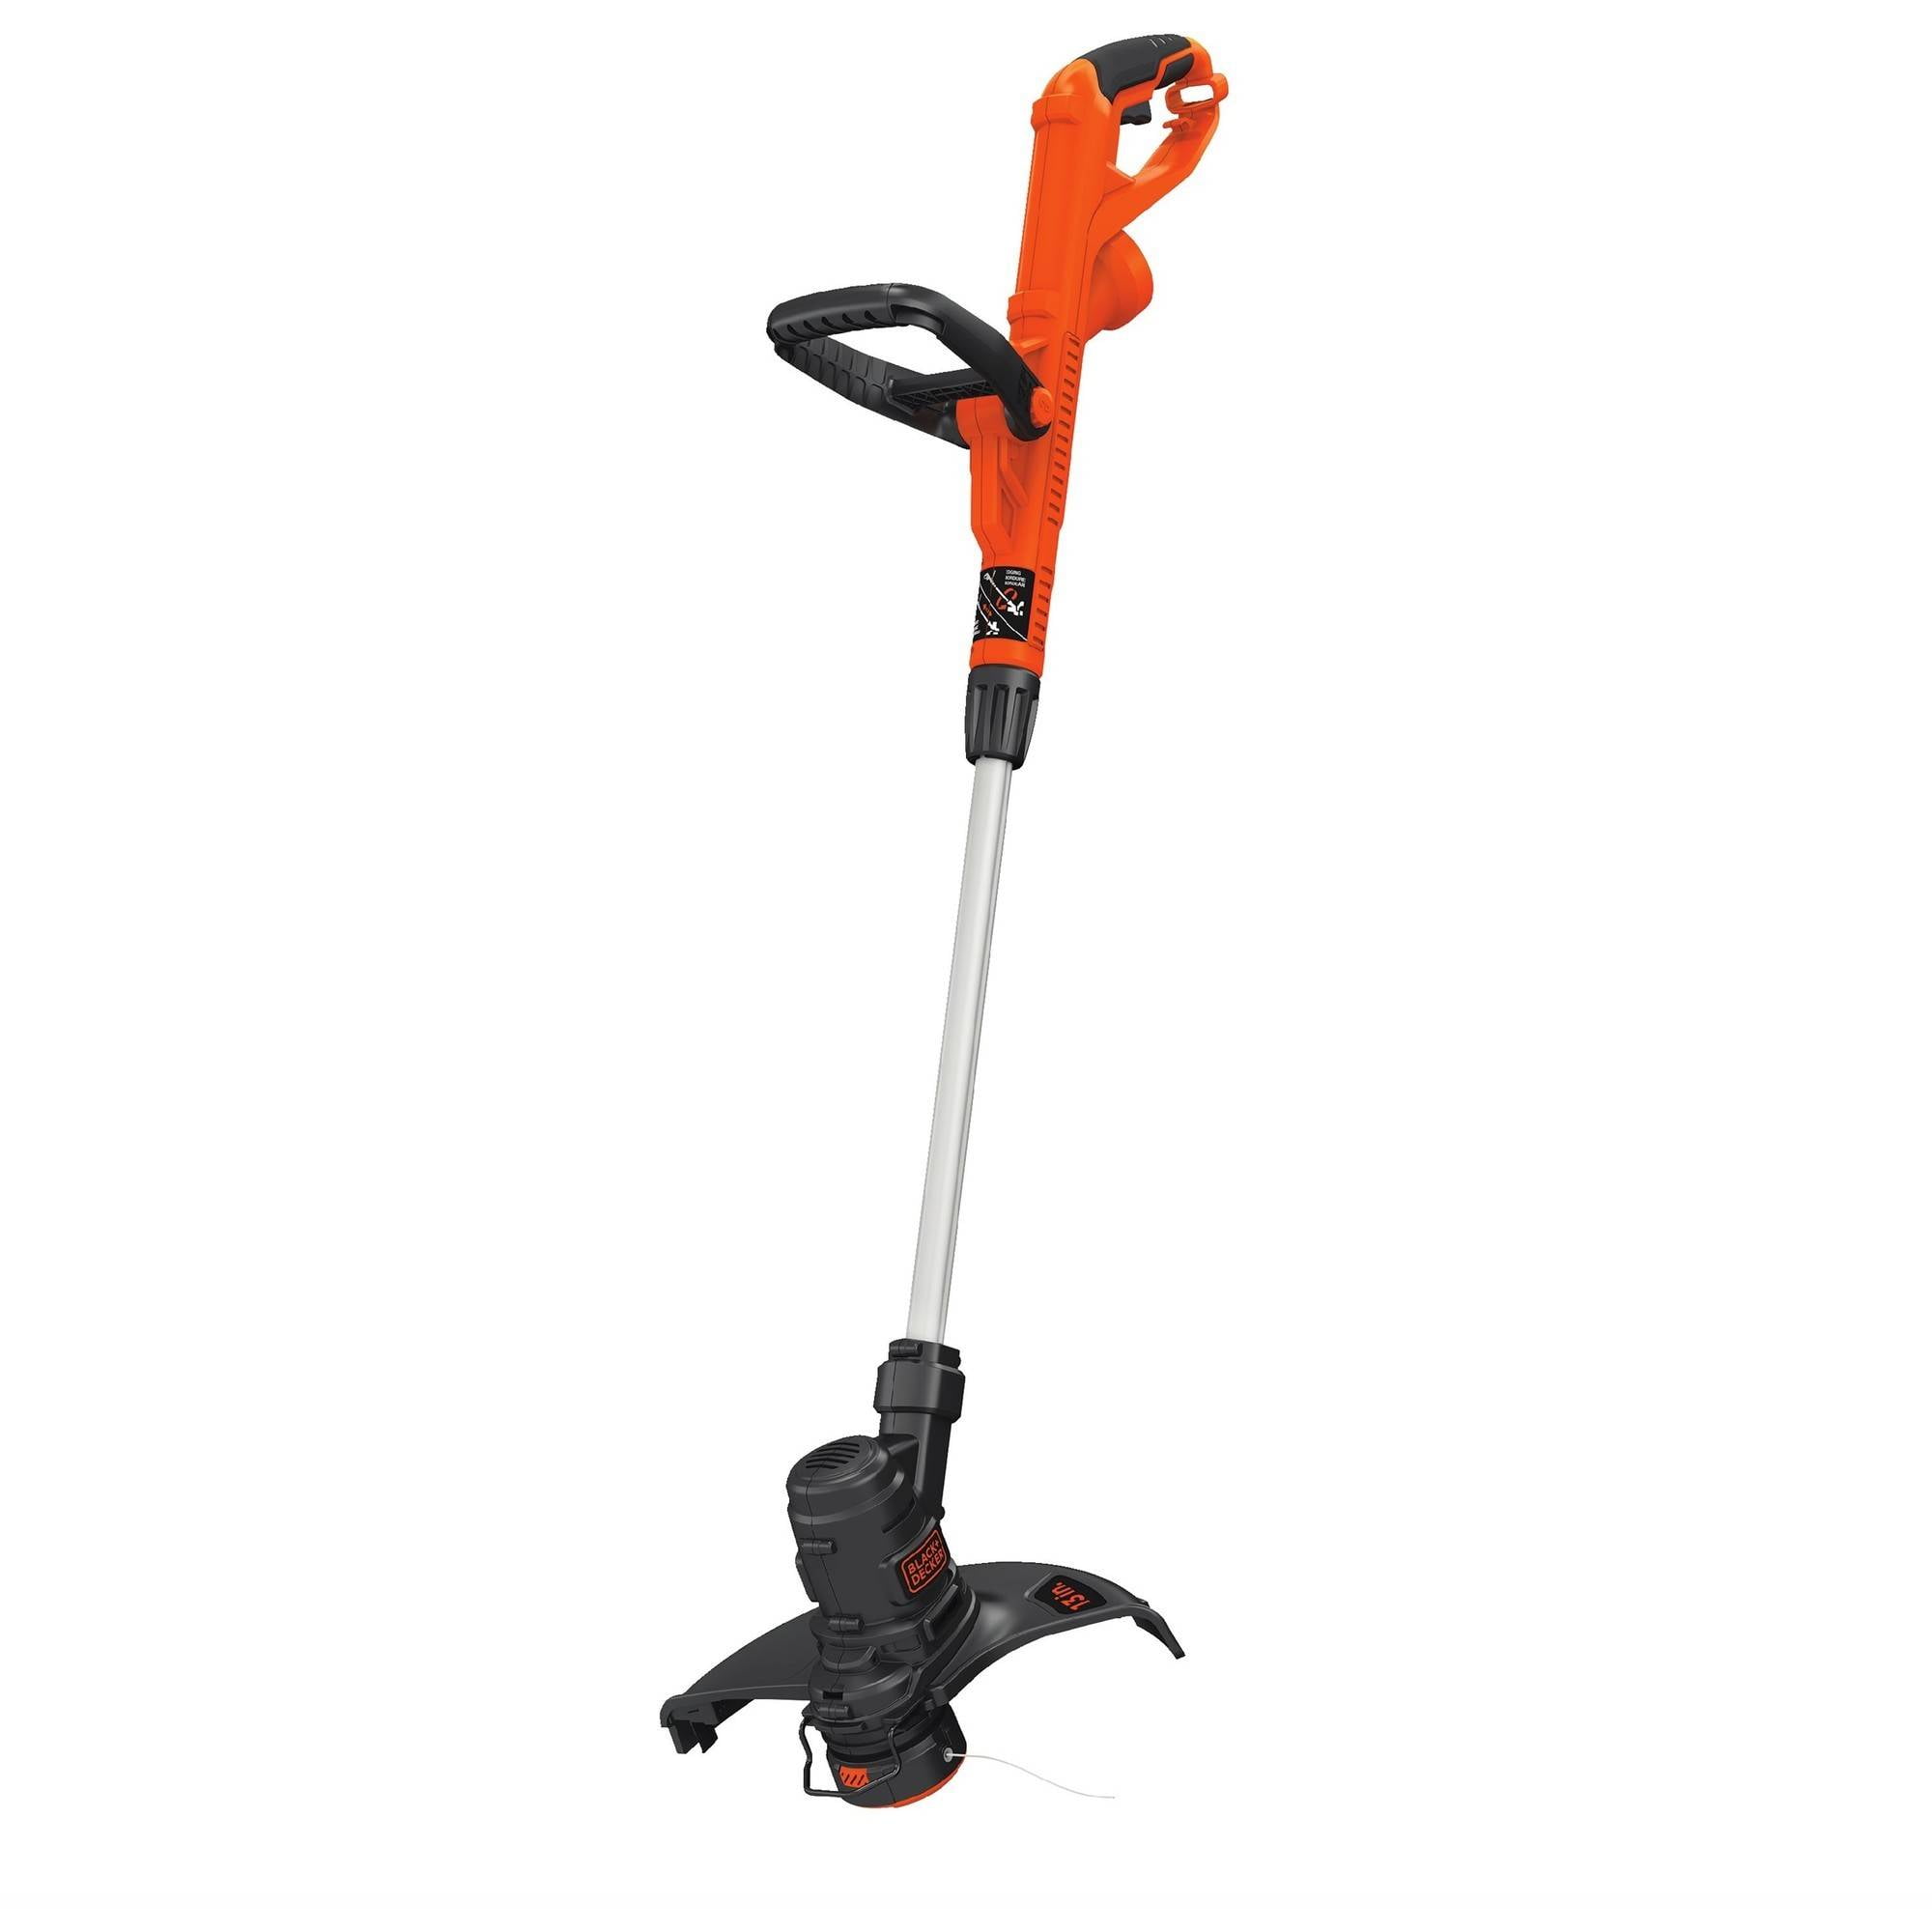 Eyoloty DF-065 90517175 String Trimmer Line for Black Decker GH710 GH700  GH750 DF-065-BKP Weed Eater Refills Line 36ft 0.065 Auto-Feed Dual Line